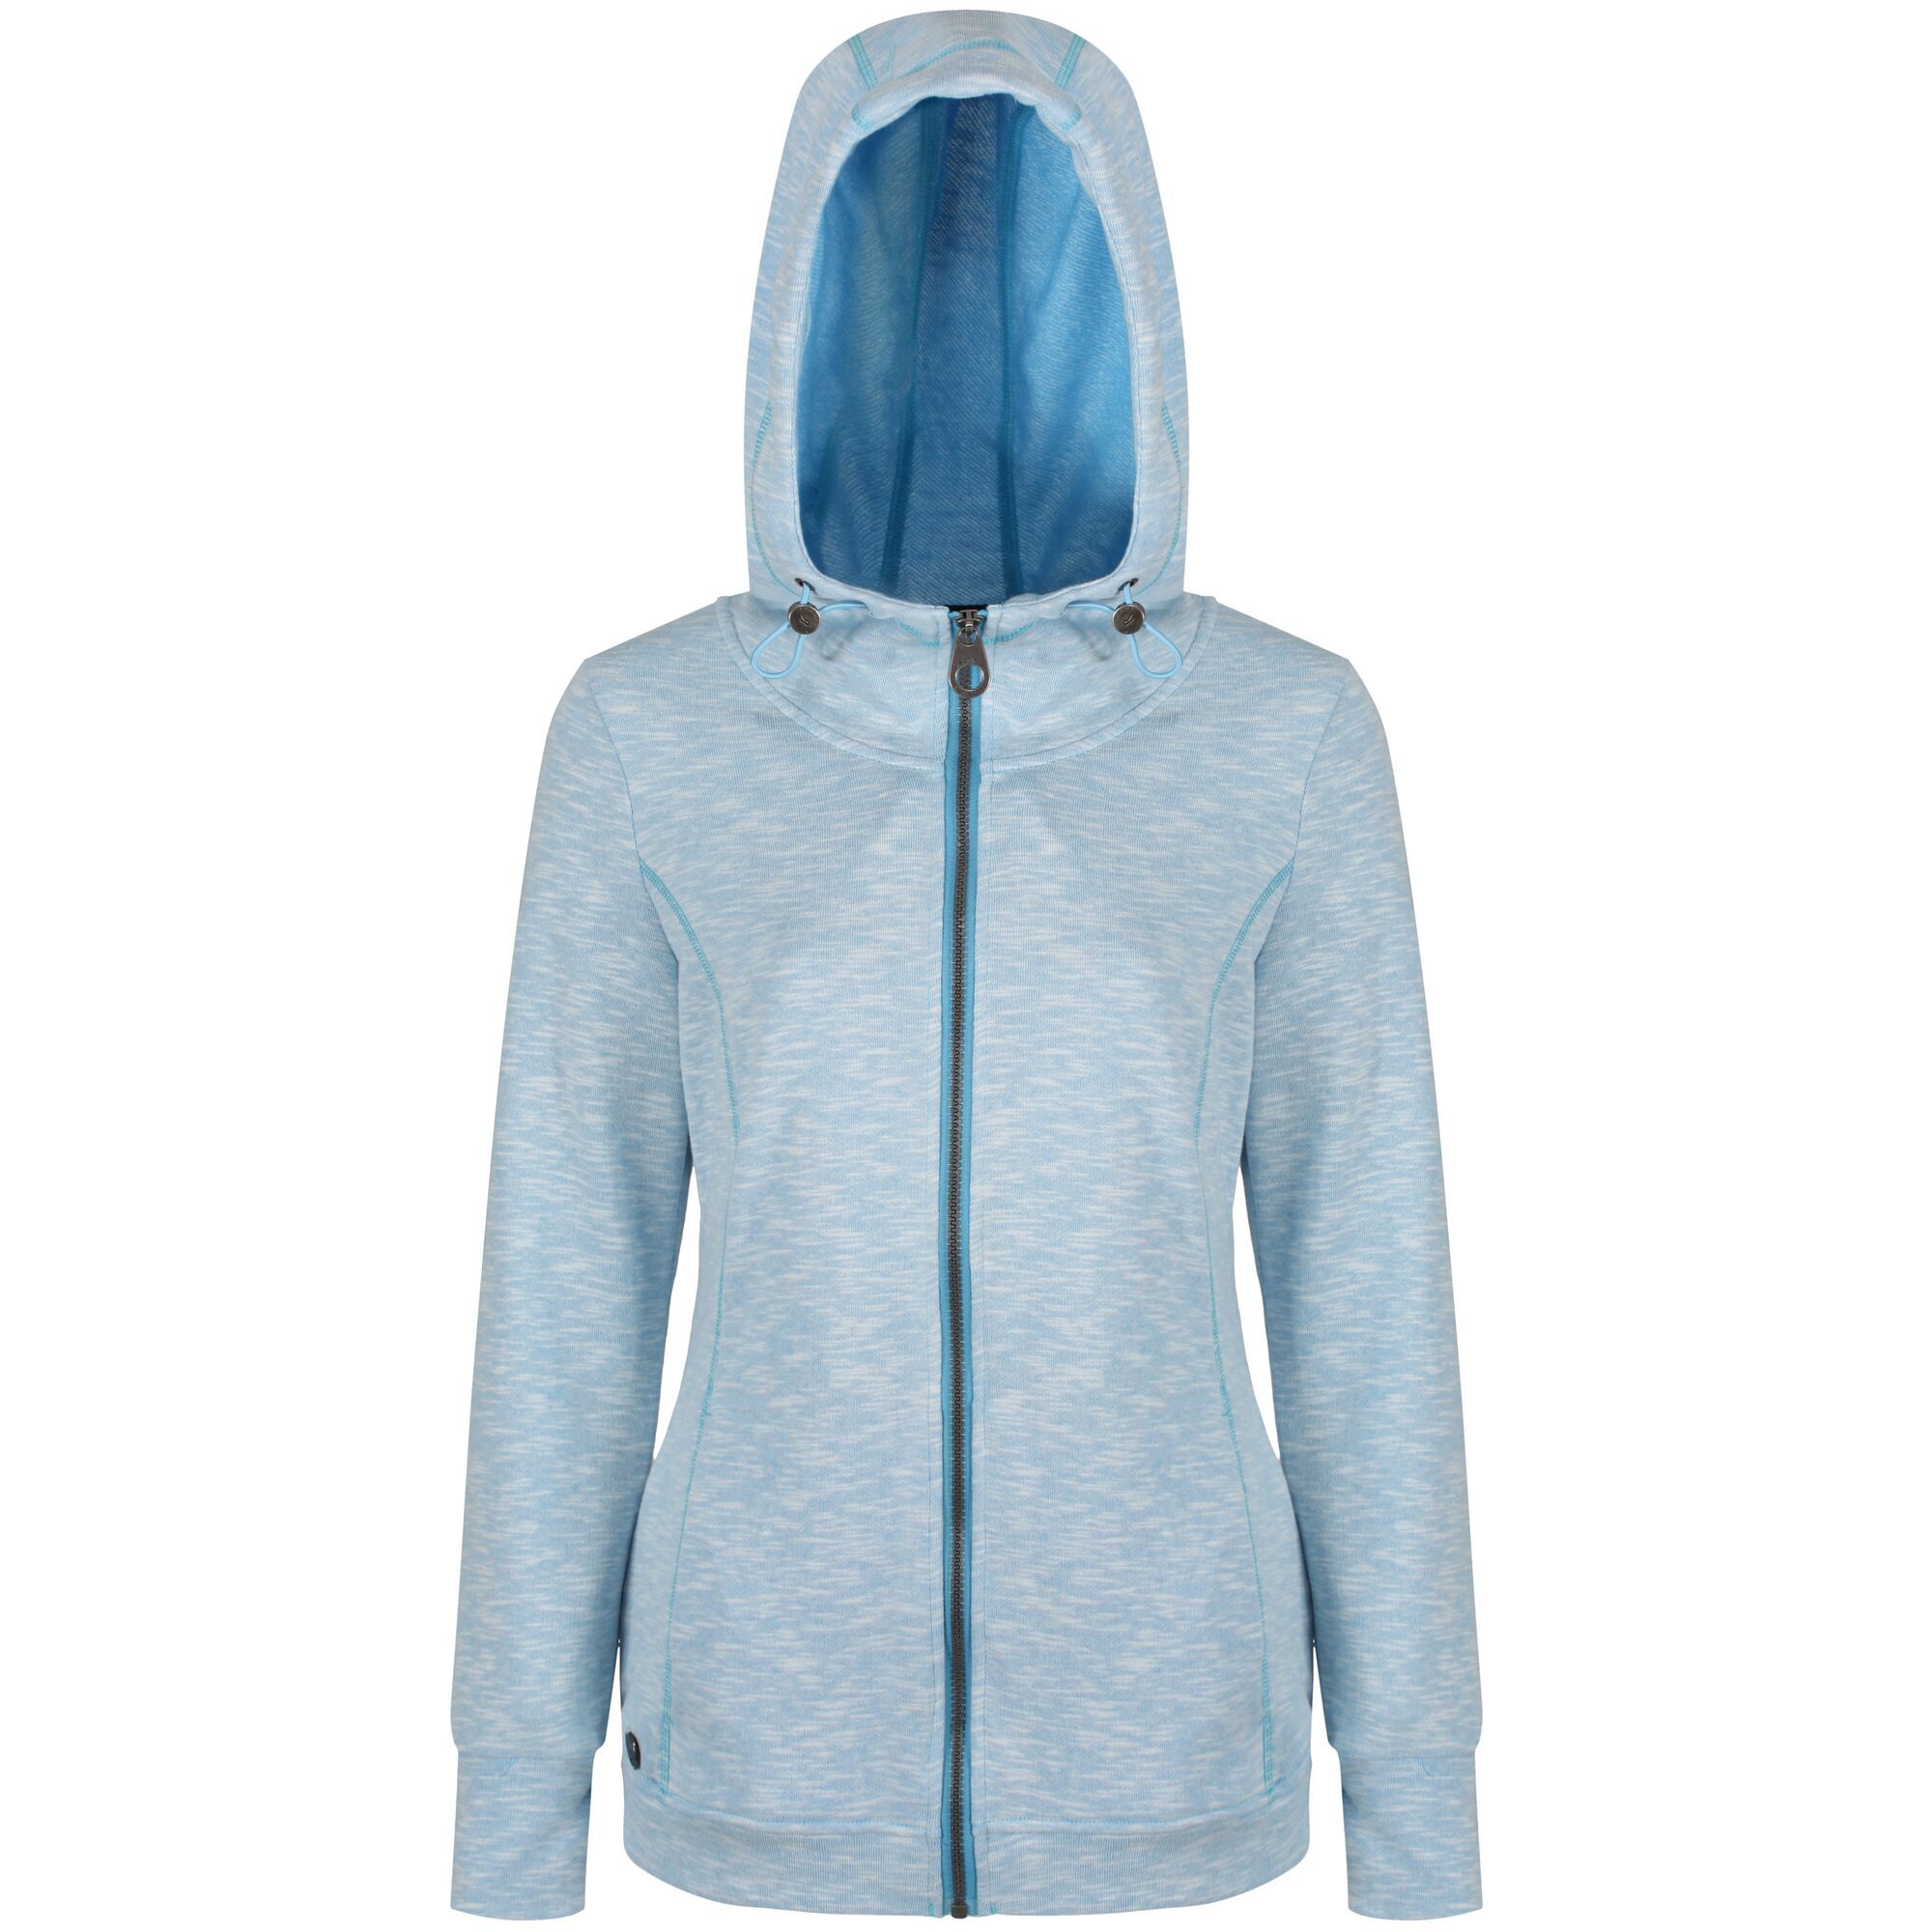 Fleece with draw cord hood and 2 lower pockets. Warm and comfortable. 64% polyester, 36% cotton. Machine washable.